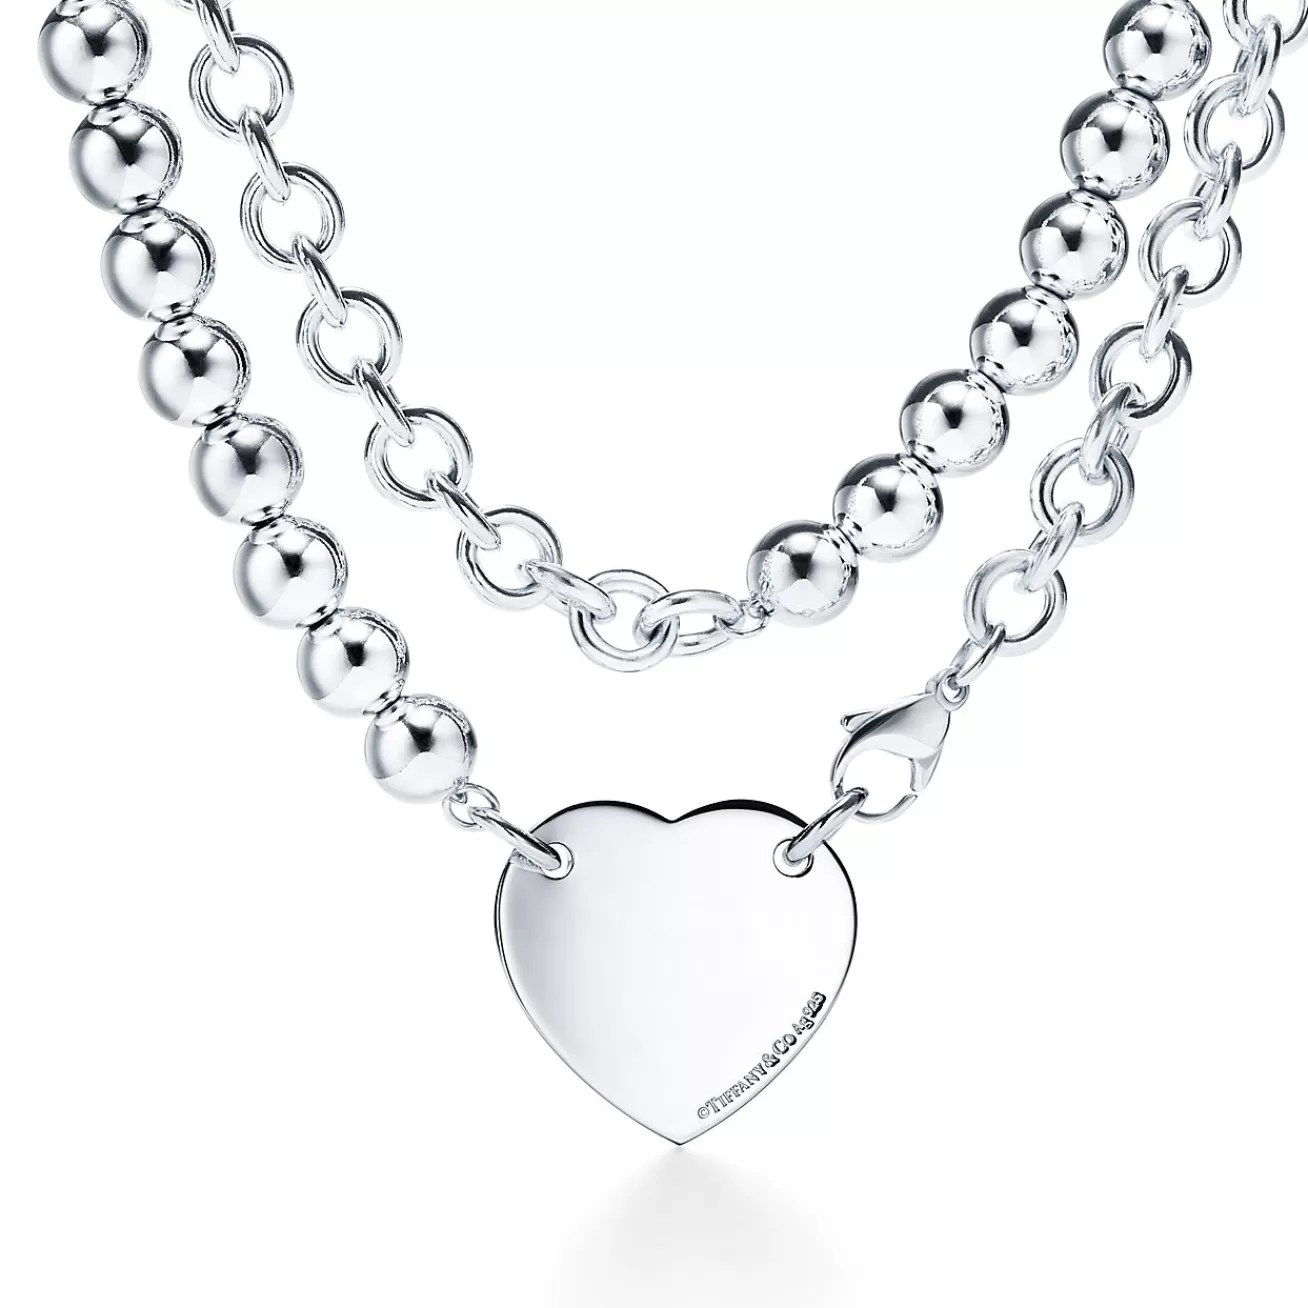 Tiffany & Co. Return to Tiffany® heart tag wrap necklace in sterling silver, 32". | ^ Necklaces & Pendants | Gifts for Her